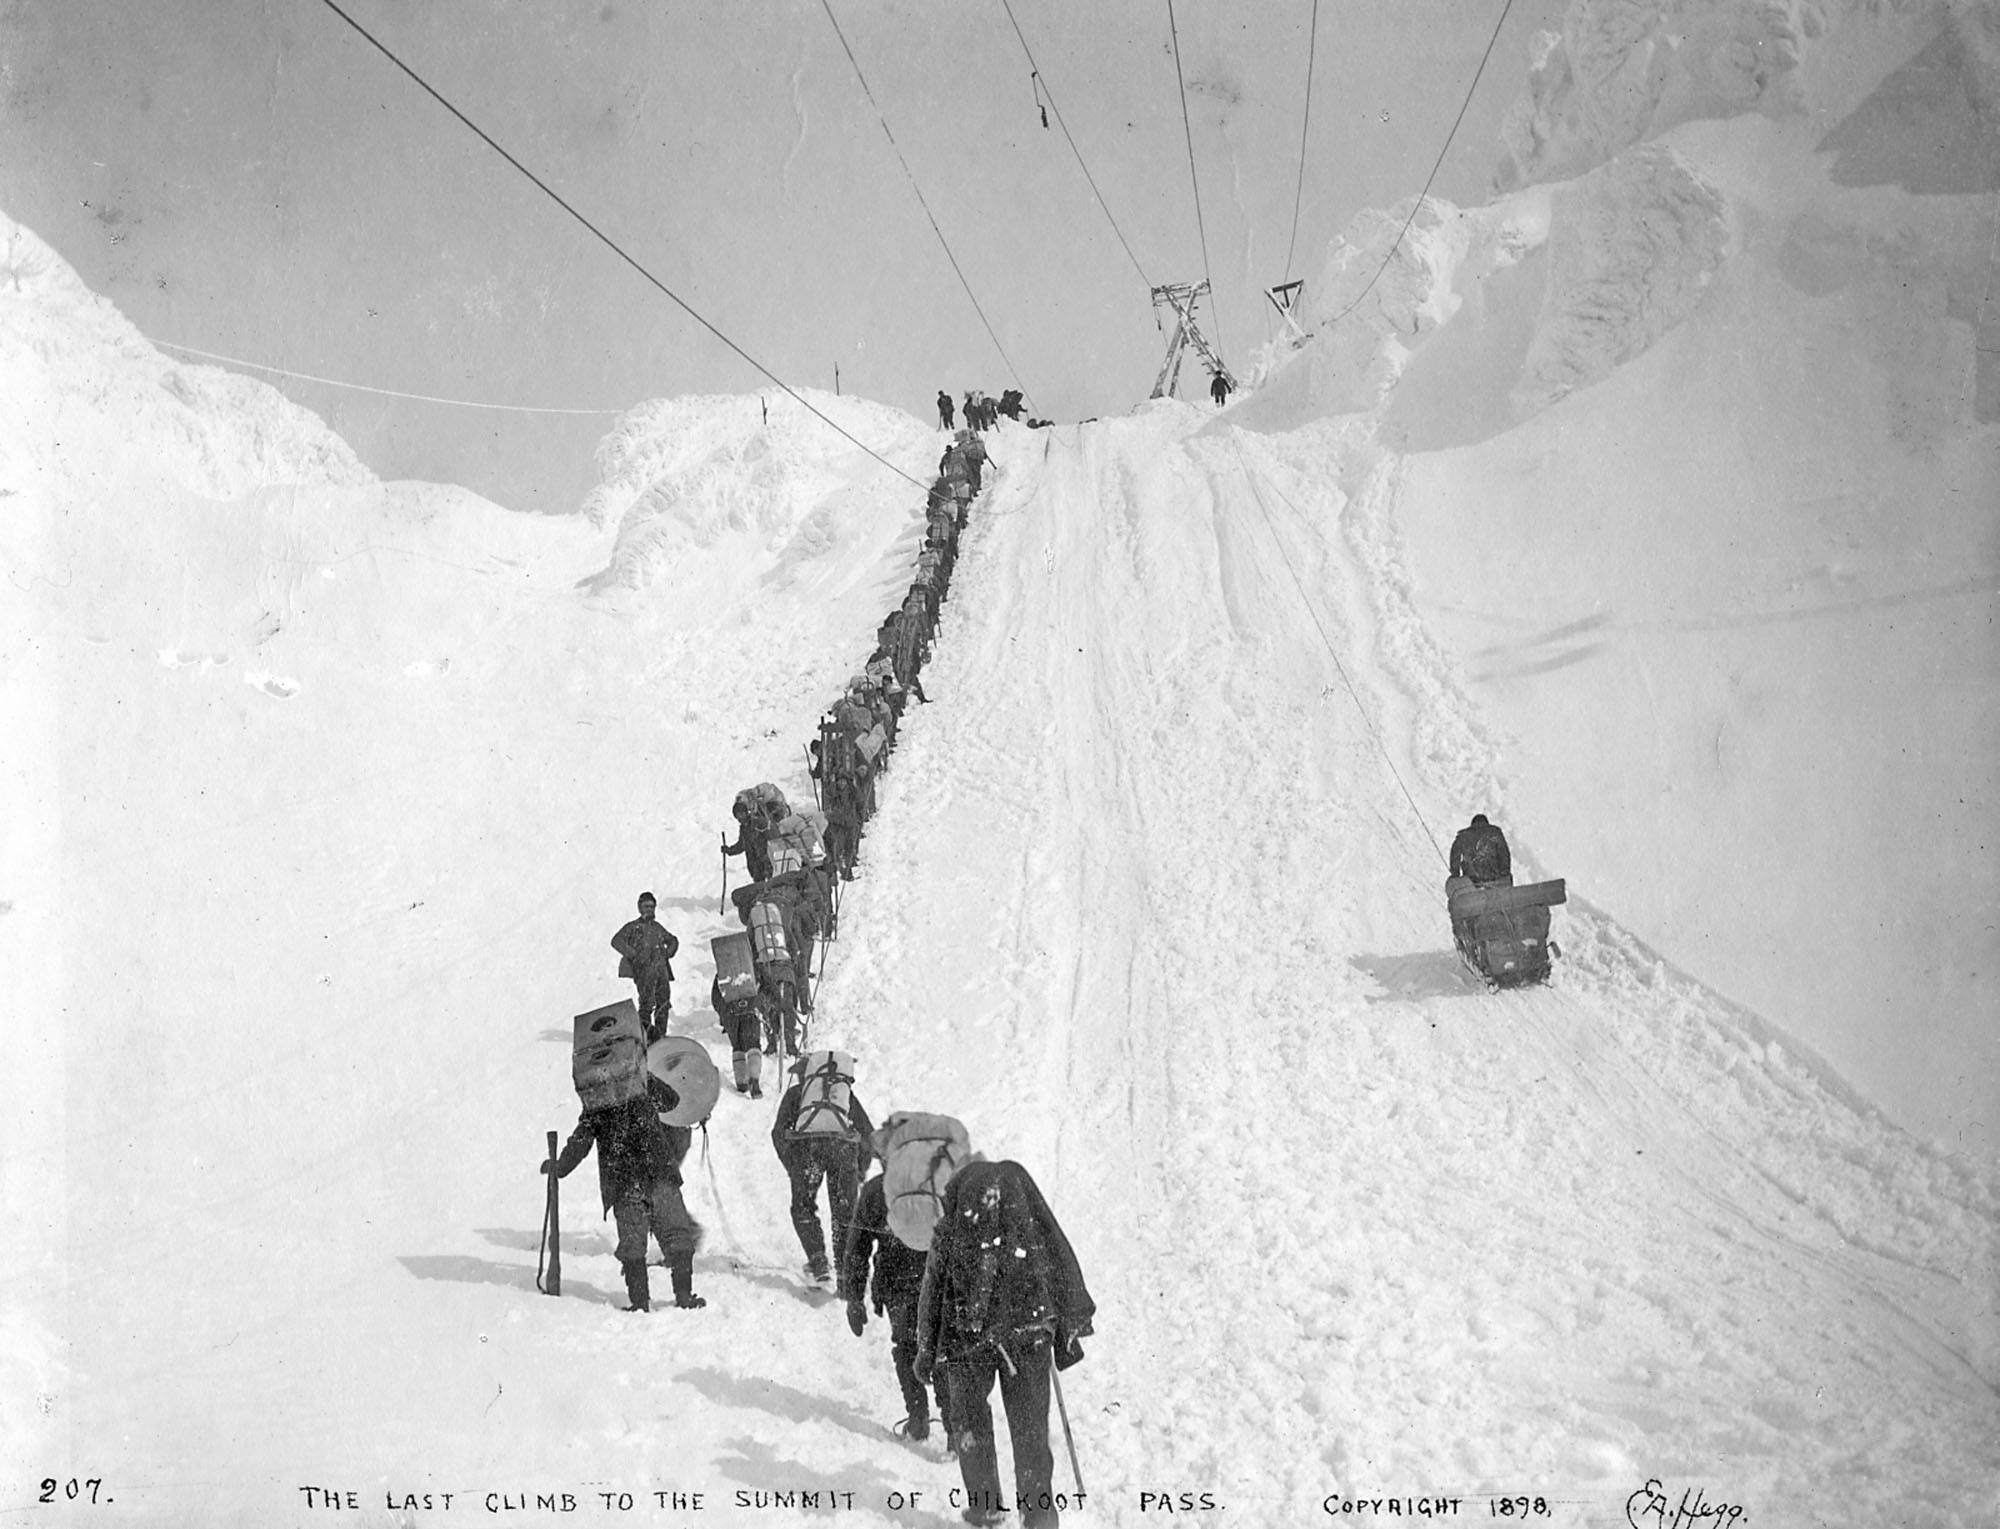 National Park Service, Klondike Gold Rush National Historical Library, Darcie Culbeck Collection, KLGO CS-50-10573. “The Last Climb to the Summit of Chilkoot Pass,” taken winter 1898. Photographer: Eric A. Hegg (207). In the center left is the northern end of the Golden Stairs between the False Summit and the True Summit and to the right of that is a single sled probably being hauled up to the Summit by the gasoline winch, part of Archie Burns’ surface tramway system. The gasoline-powered tramway was introduced by mid-April 1898. It was described as “simply a pulley drum and gasoline engine at the summit of the pass, and enough rope to reach the bottom. Sleds were hitched onto the rope, which was wound around the drum and it pulled them to the top.”